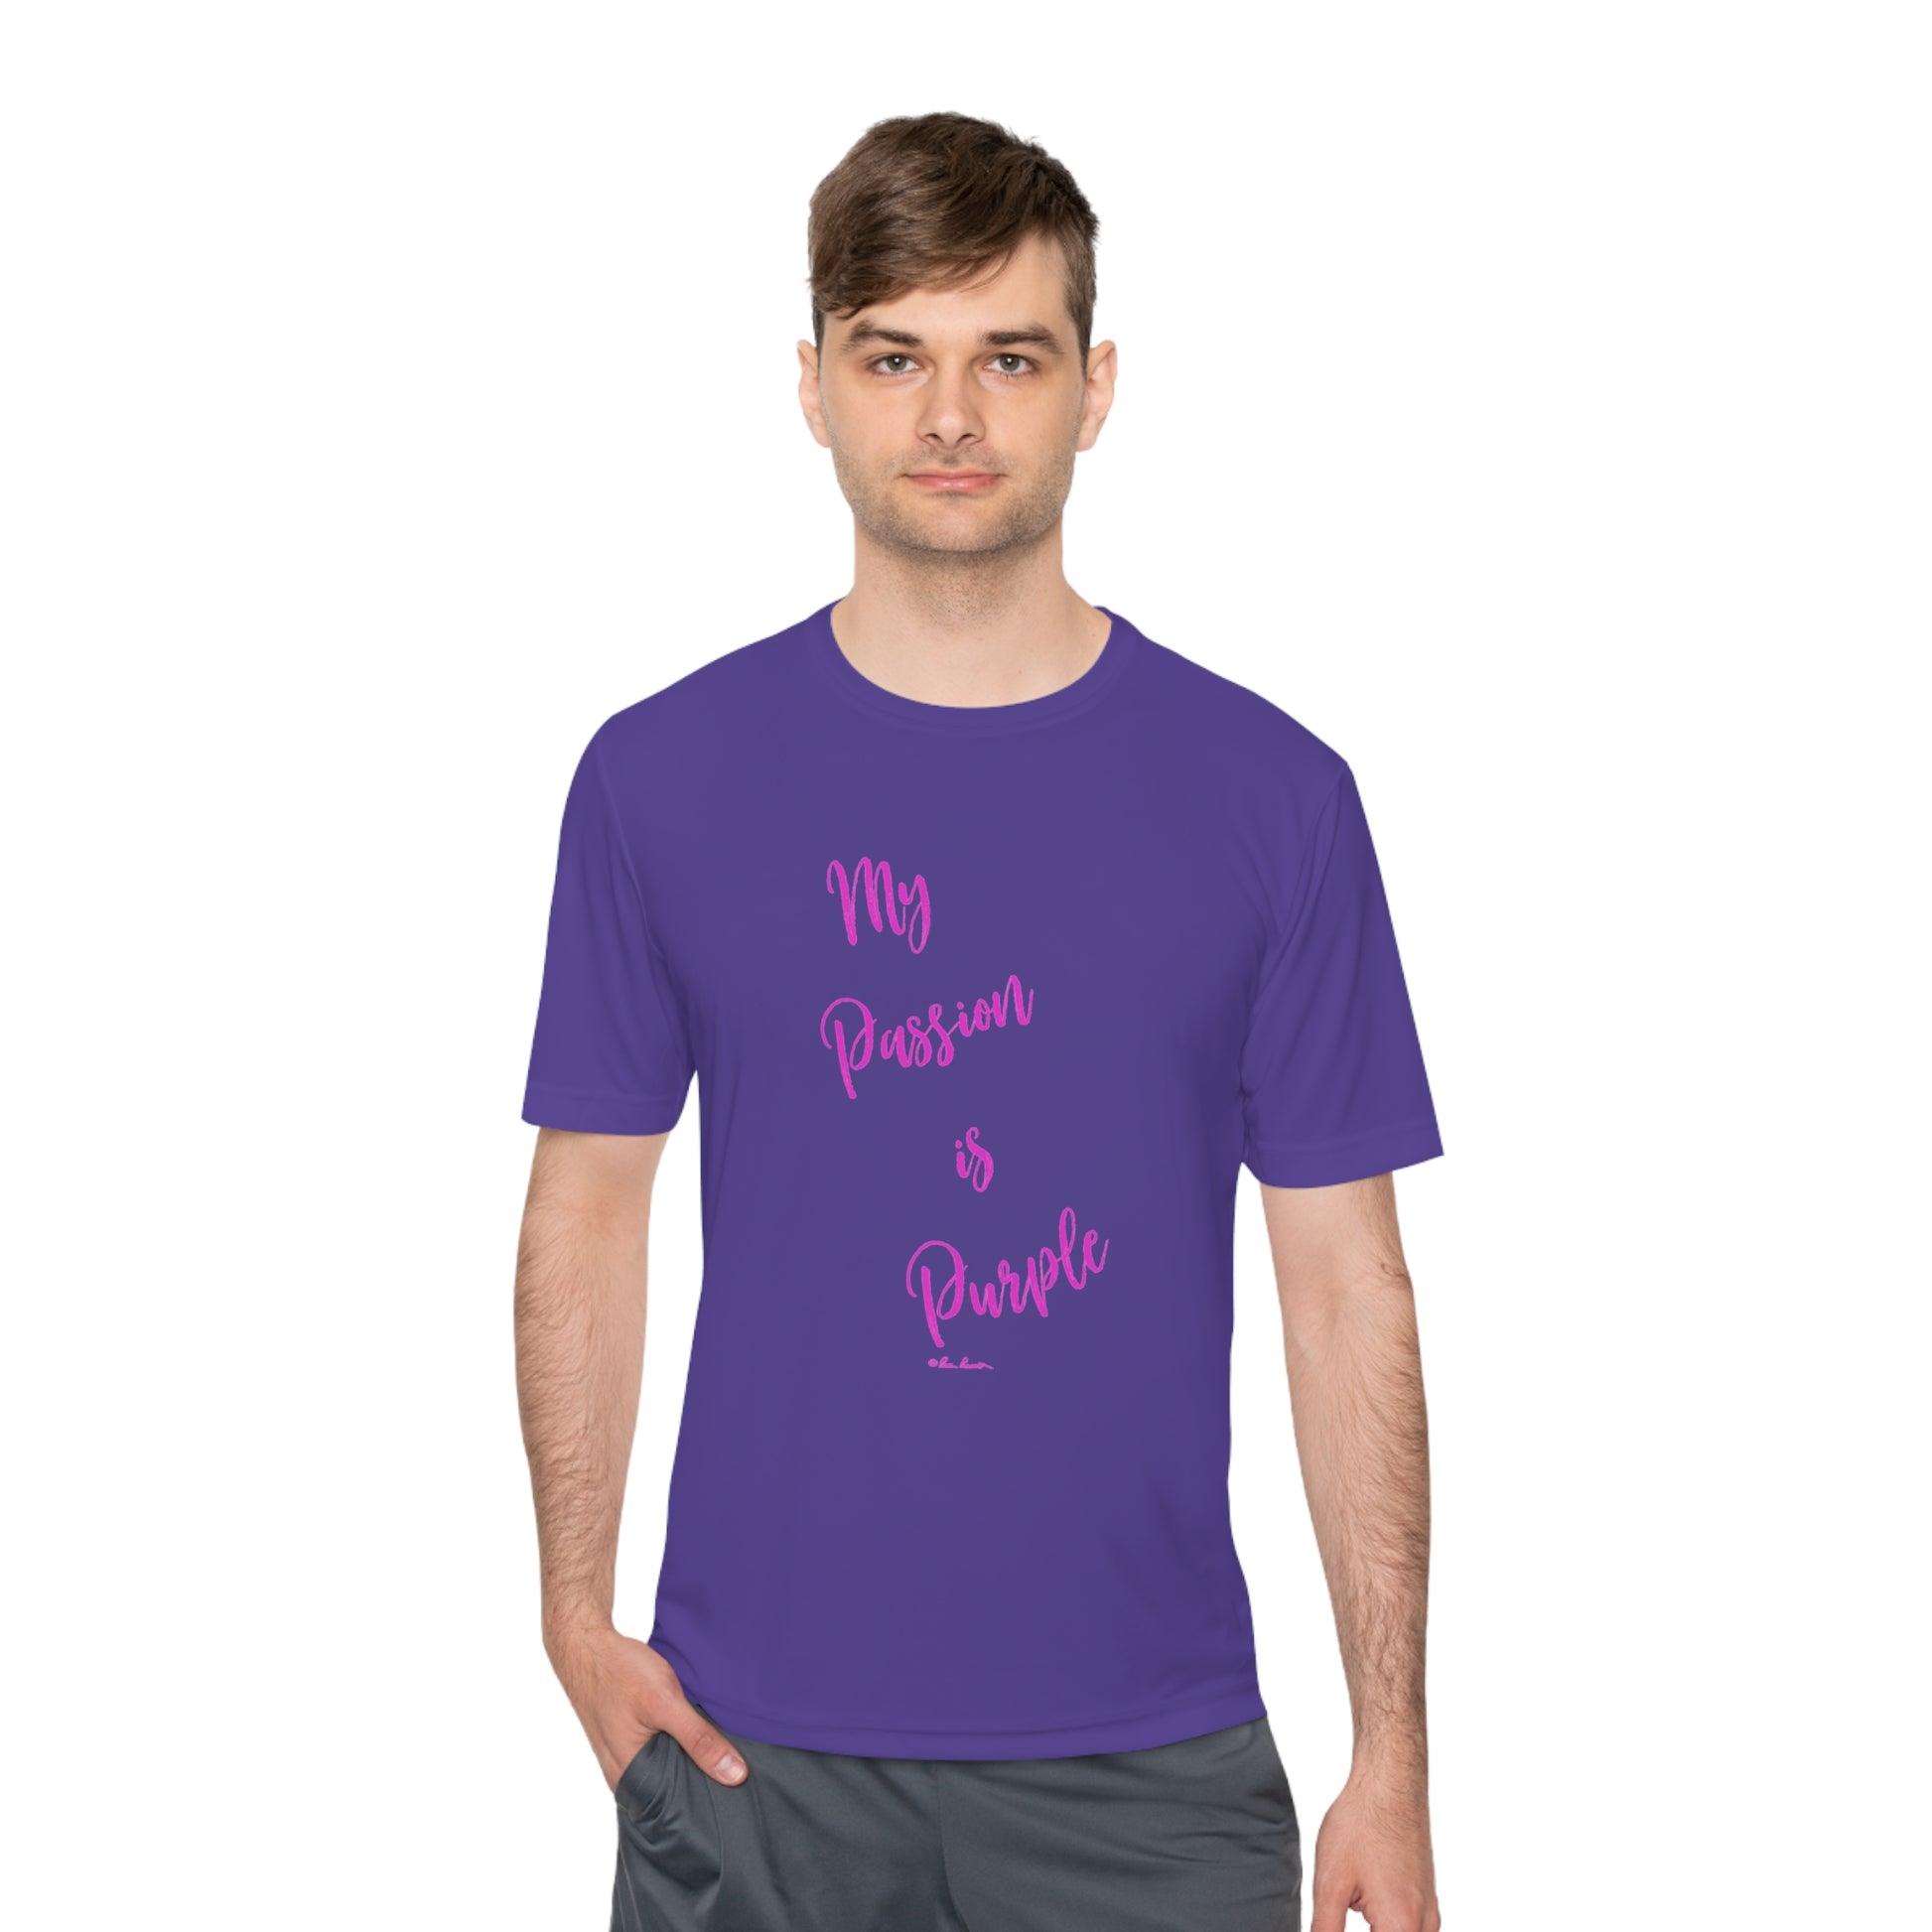 Mock up of a man wearing the shirt